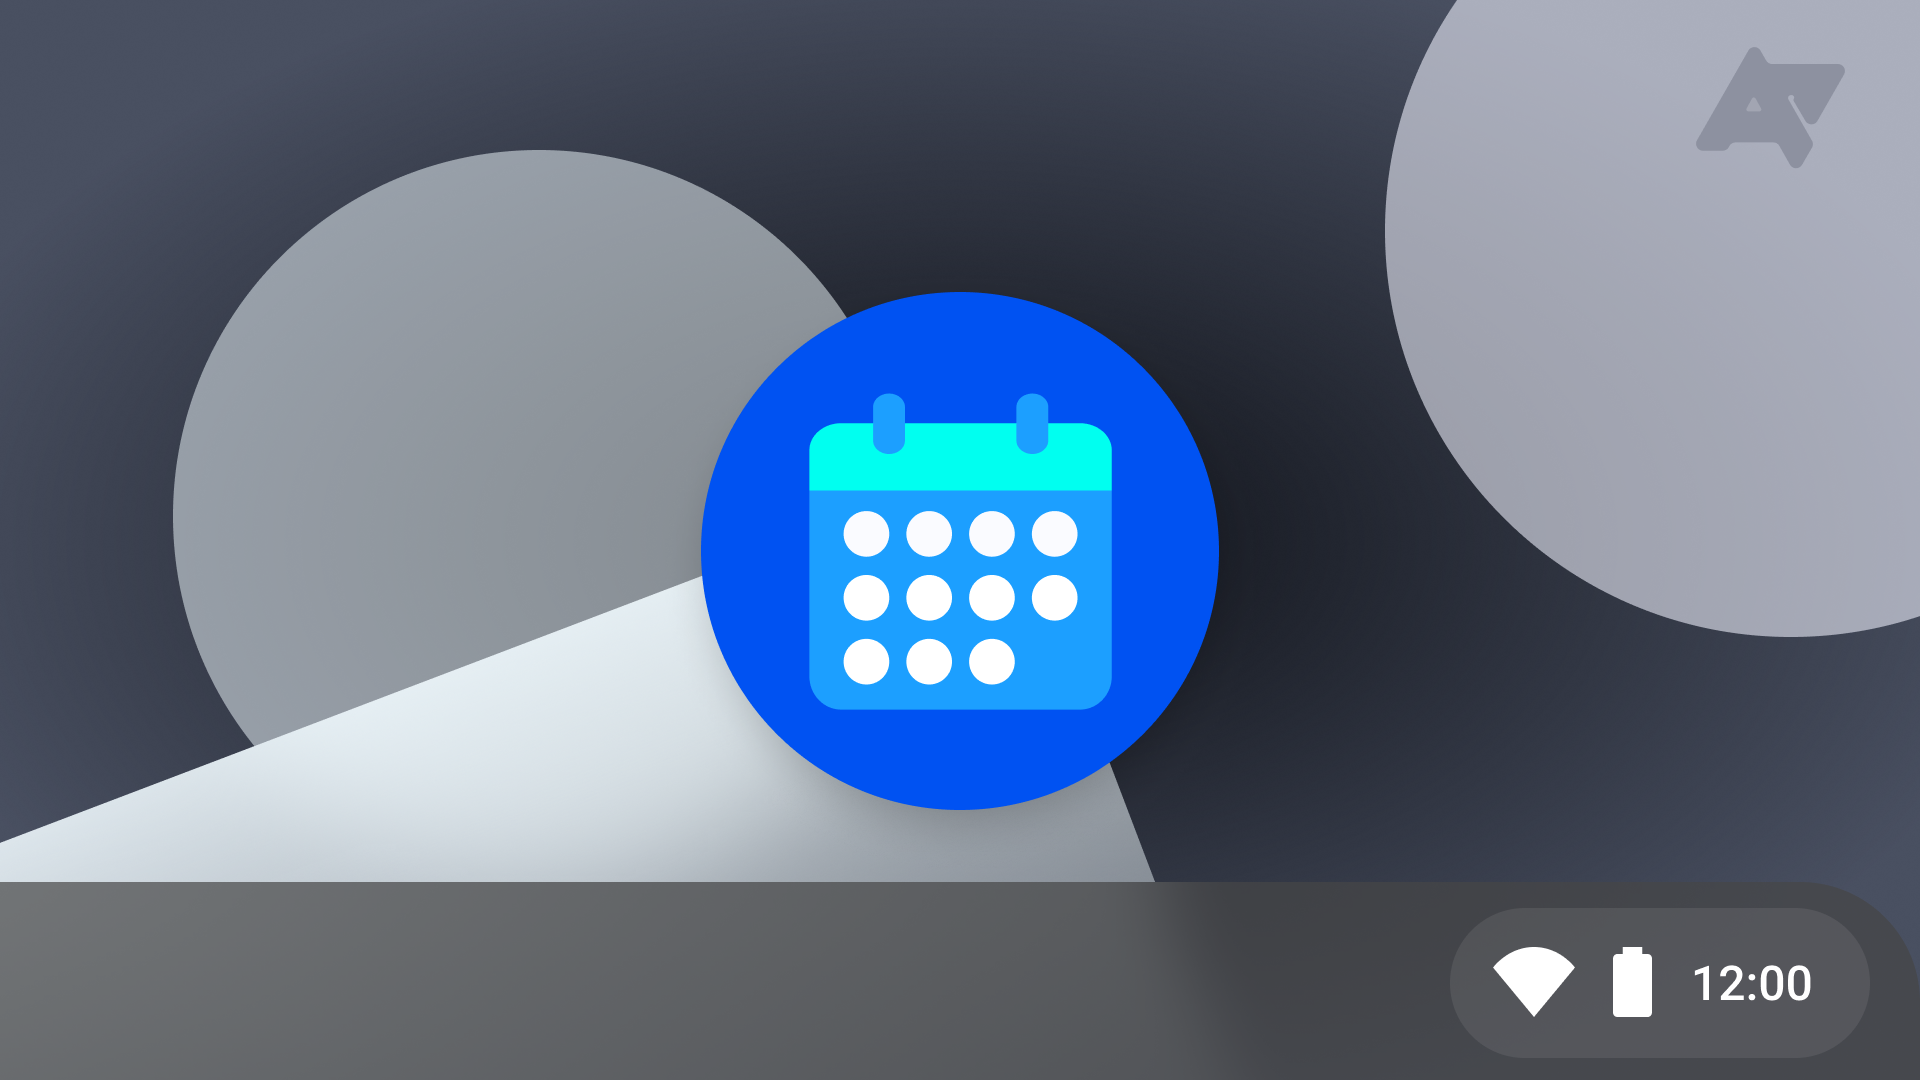 Google Calendar integration in Chrome OS is one step closer to reality